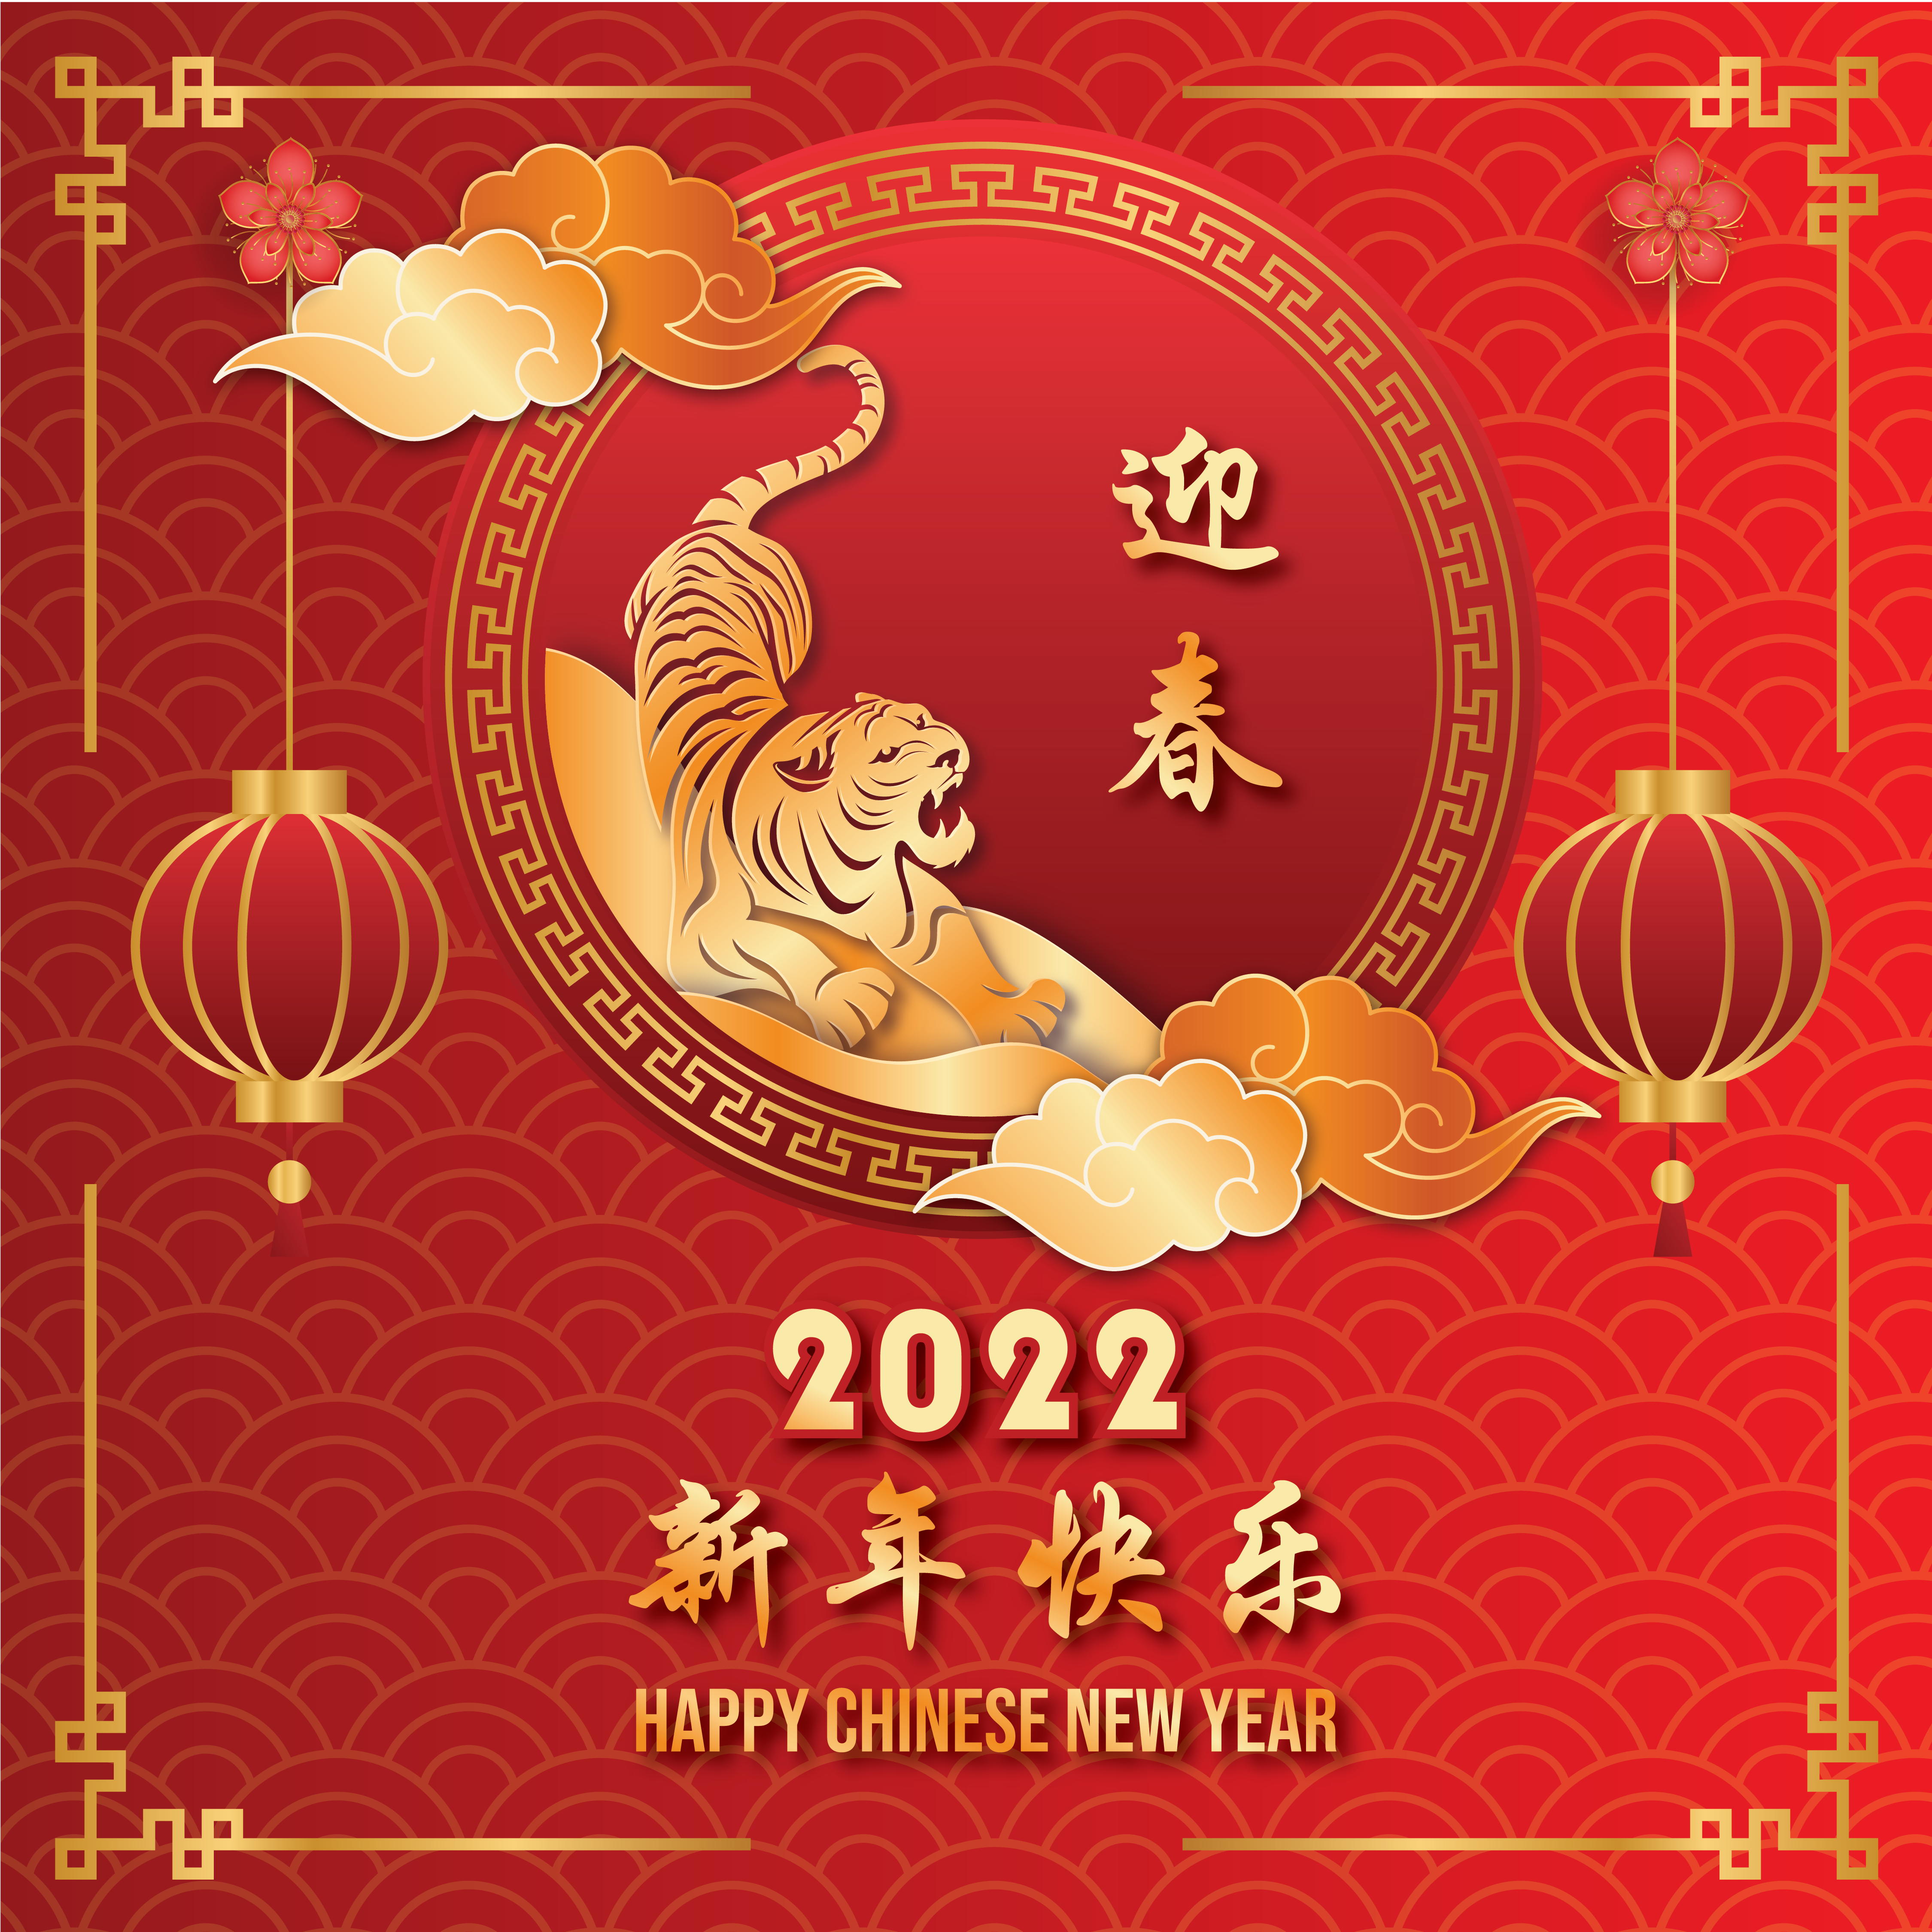 Chinese New Year Instagram Social Posting